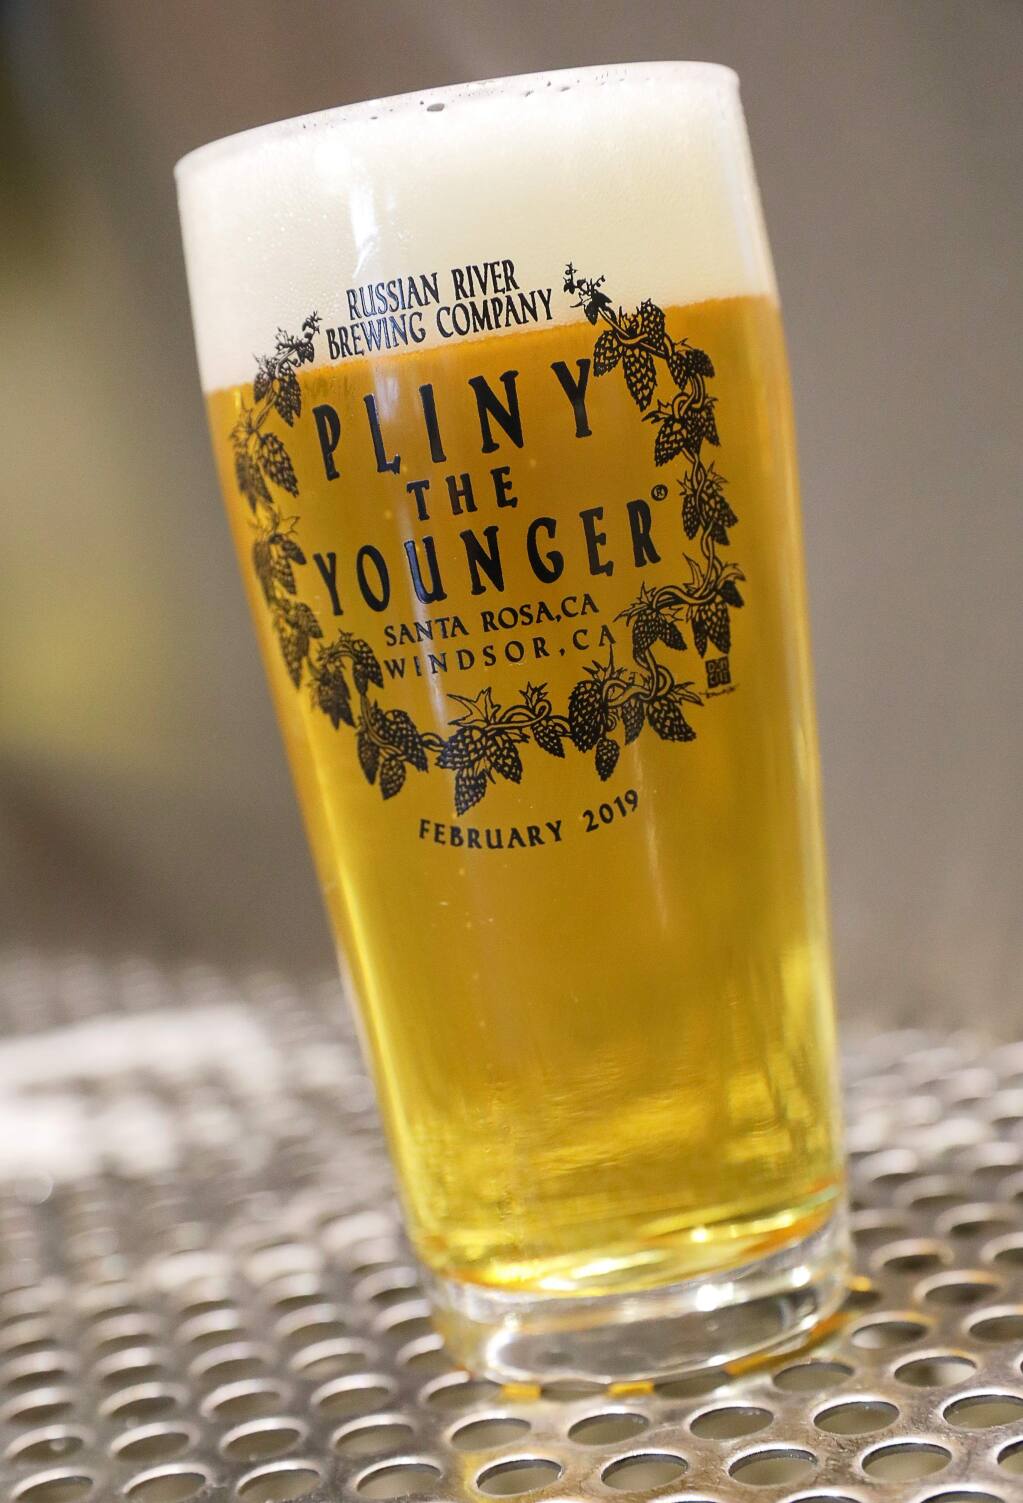 Russian River Brewing Company's Pliny the Younger to be sold in 10